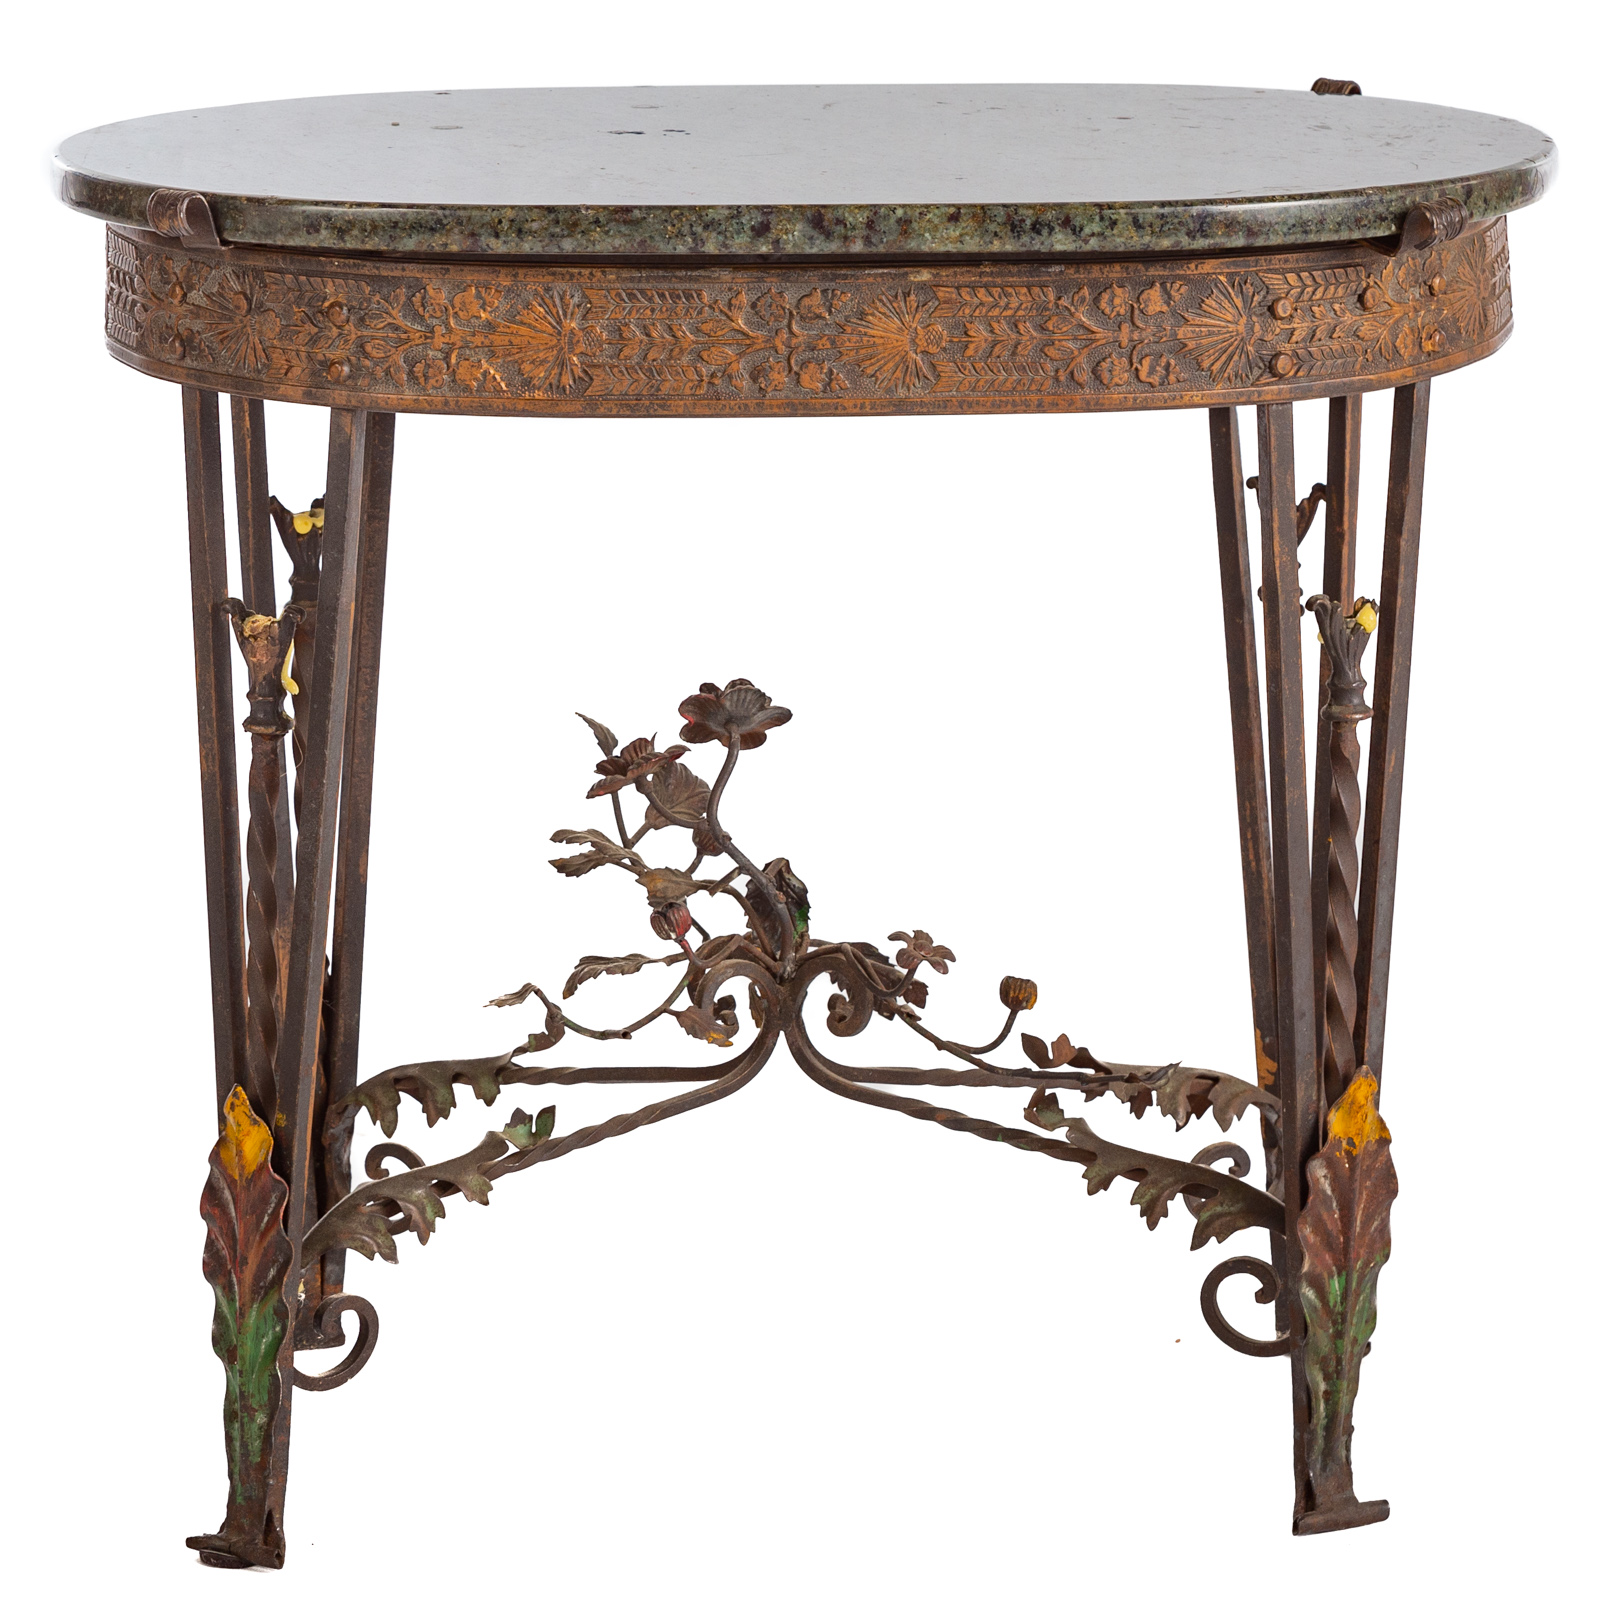 MARBLE & IRON SIDE TABLE Oval marble